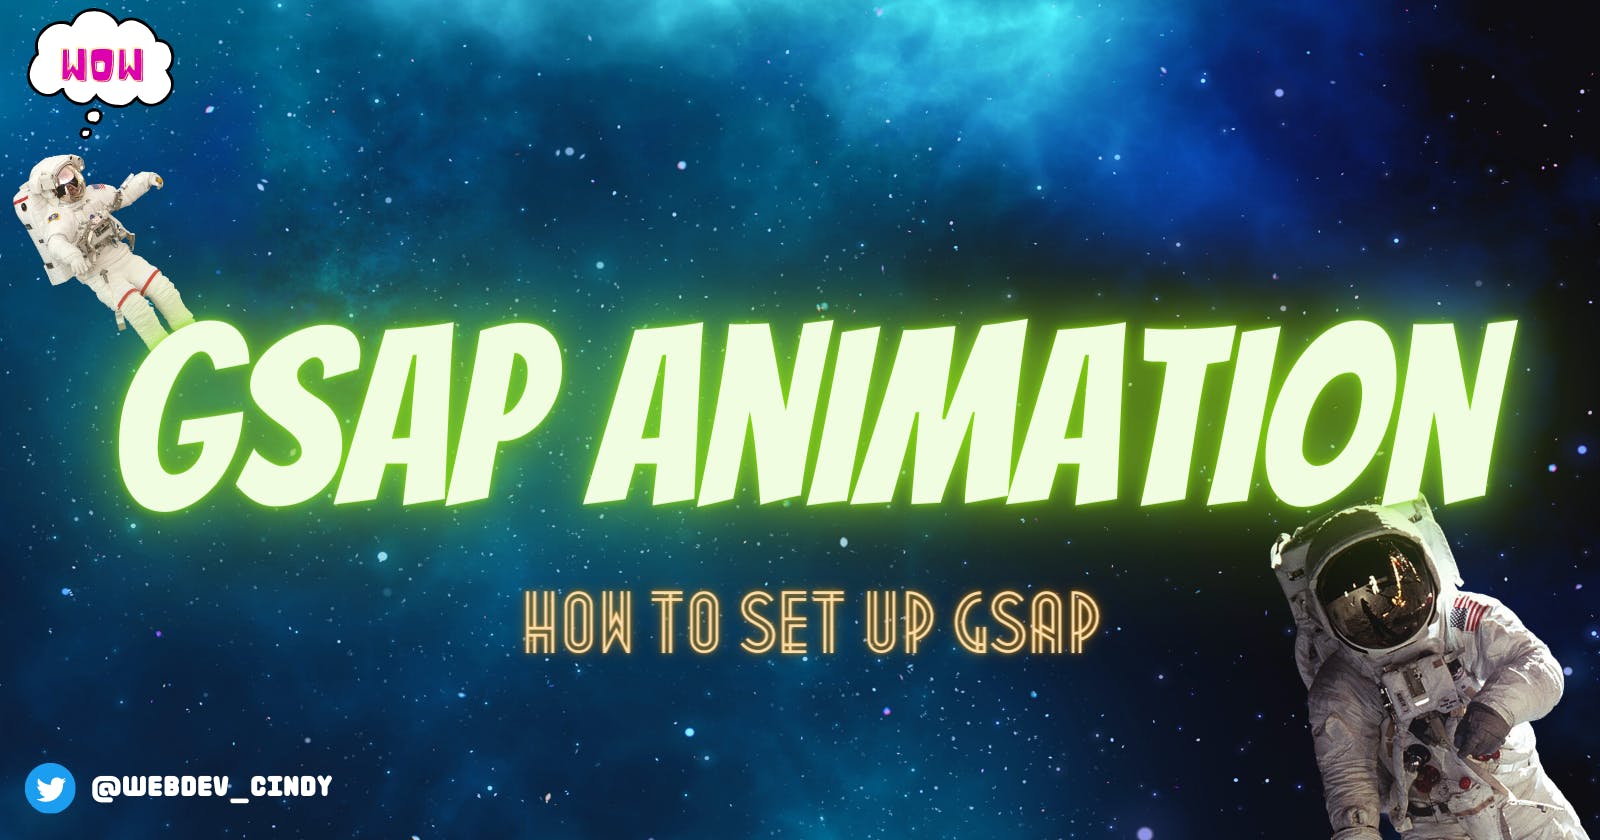 Intro to GSAP Animation for Complete Beginners - #2